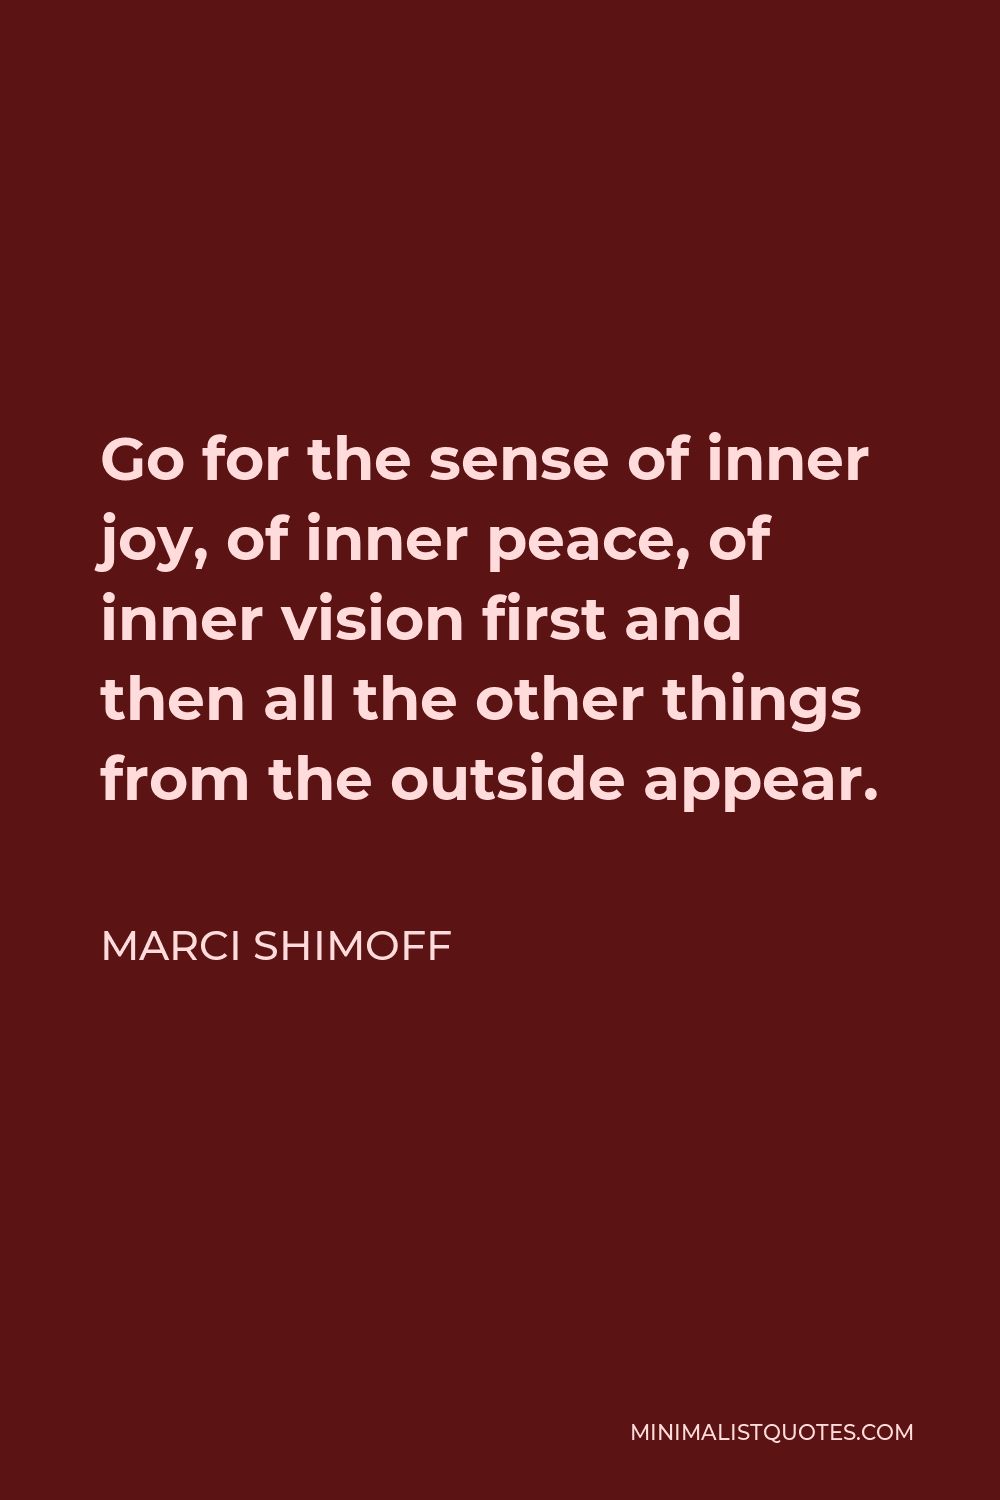 Marci Shimoff Quote - Go for the sense of inner joy, of inner peace, of inner vision first and then all the other things from the outside appear.